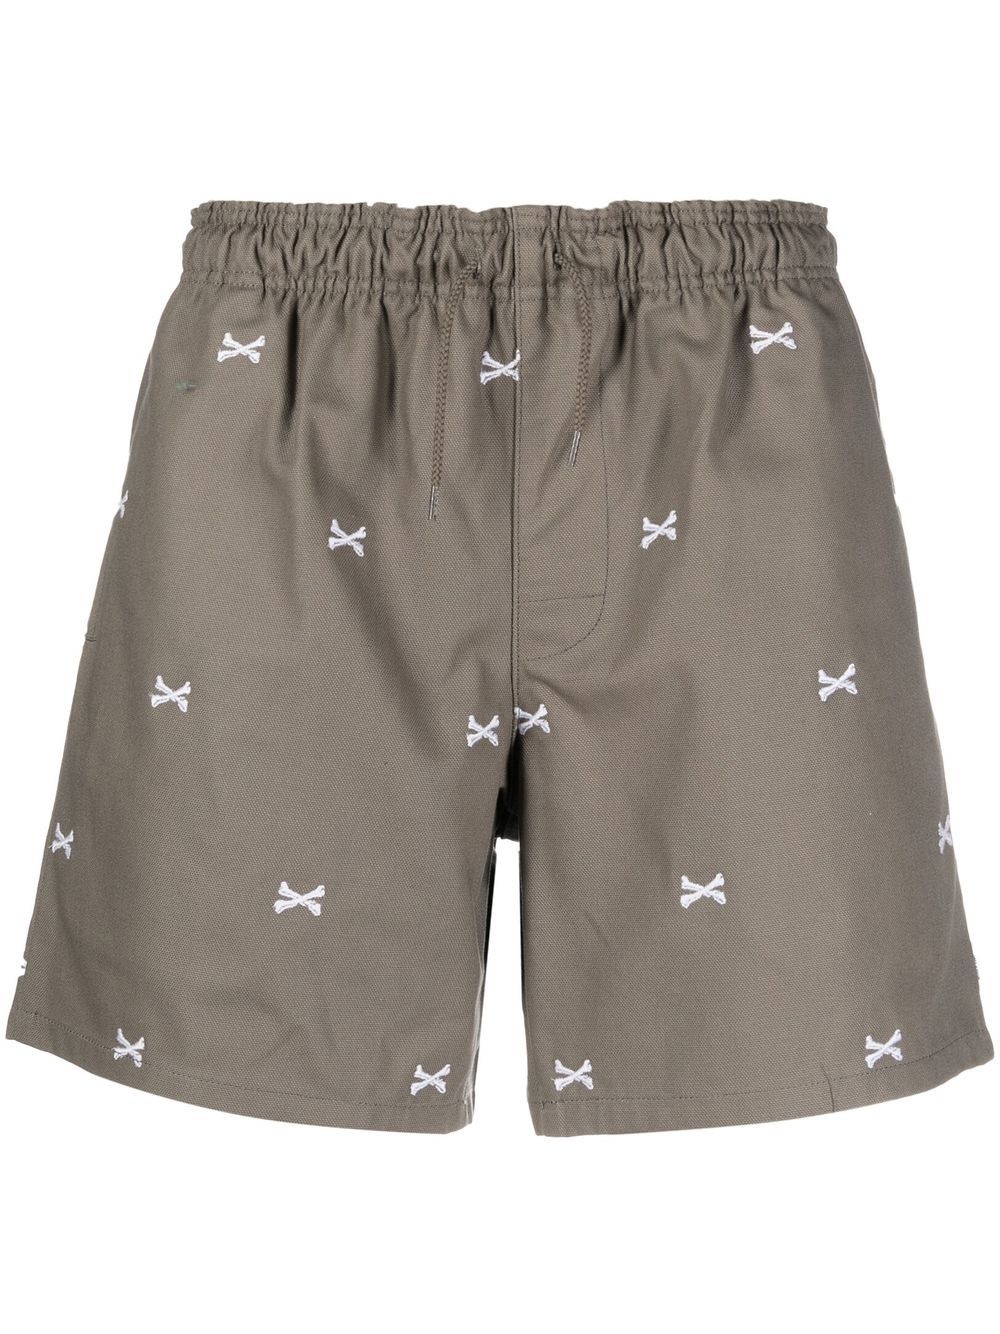 Seagull 01 embroidered track shorts - 1